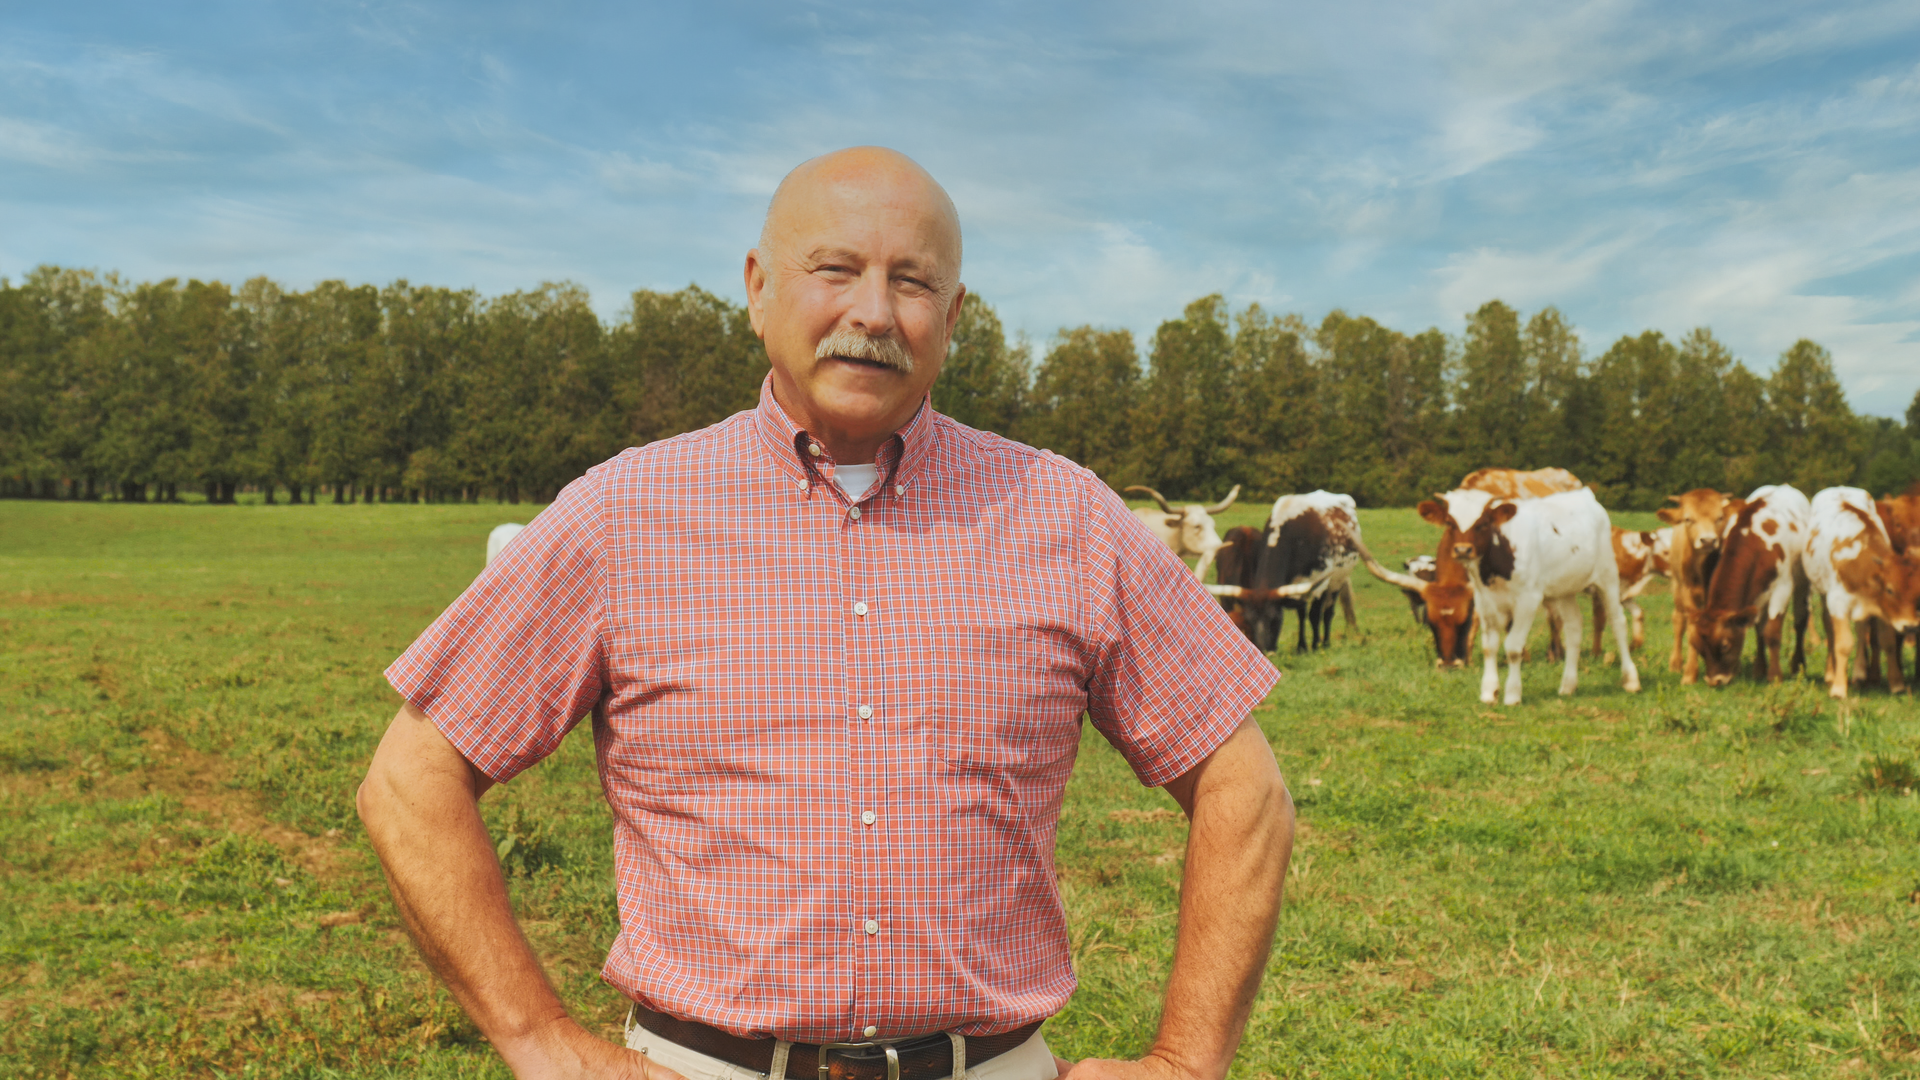 Male farmer stands smiling on a sunny day in a field with cows behind him and a tree line in the distance.